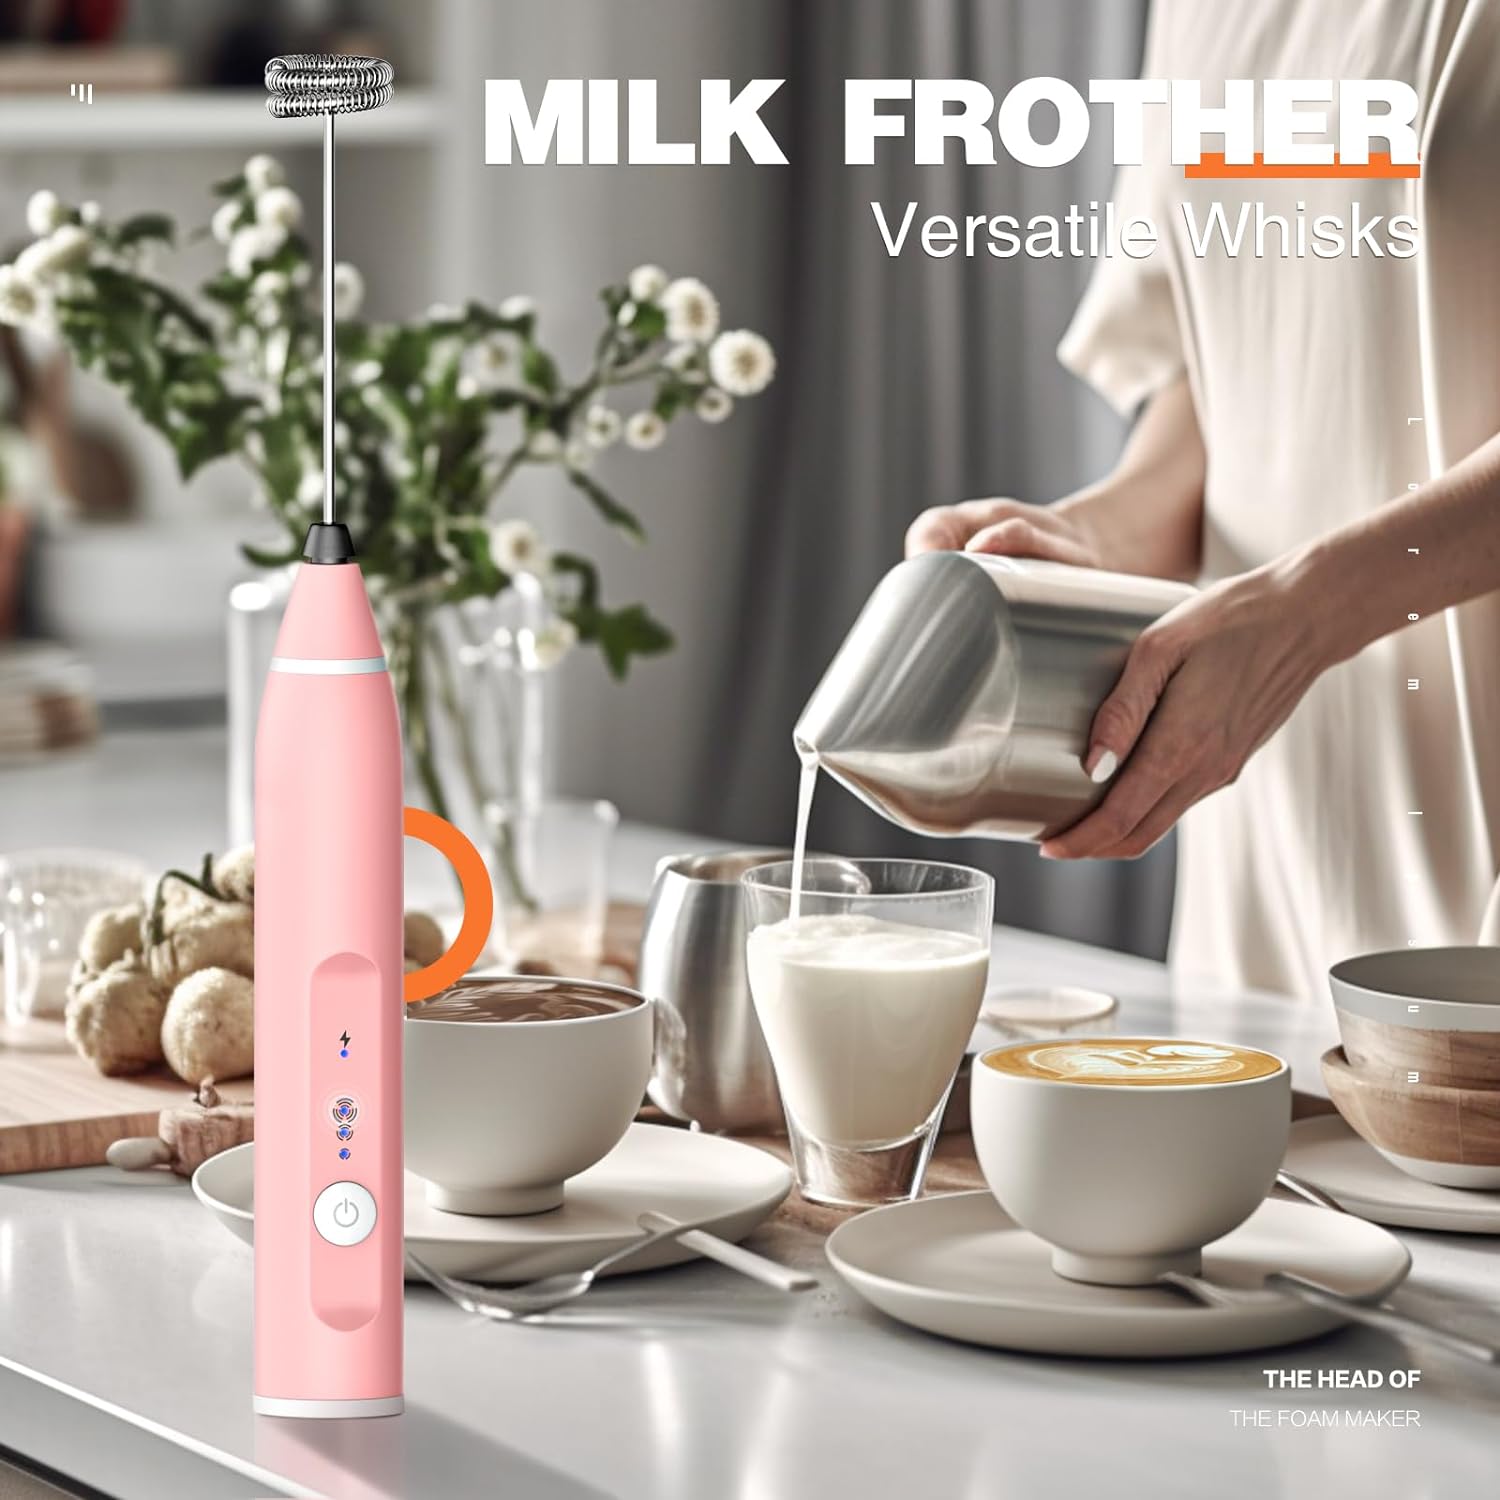 Milk Frother Rechargeable Handheld Electric Whisk Coffee Frother Mixer with 3 Stainless whisks 3 Speed Adjustable Foam Maker Blender for Coffee Matcha Latte Cappuccino Hot Chocolate(Pink)